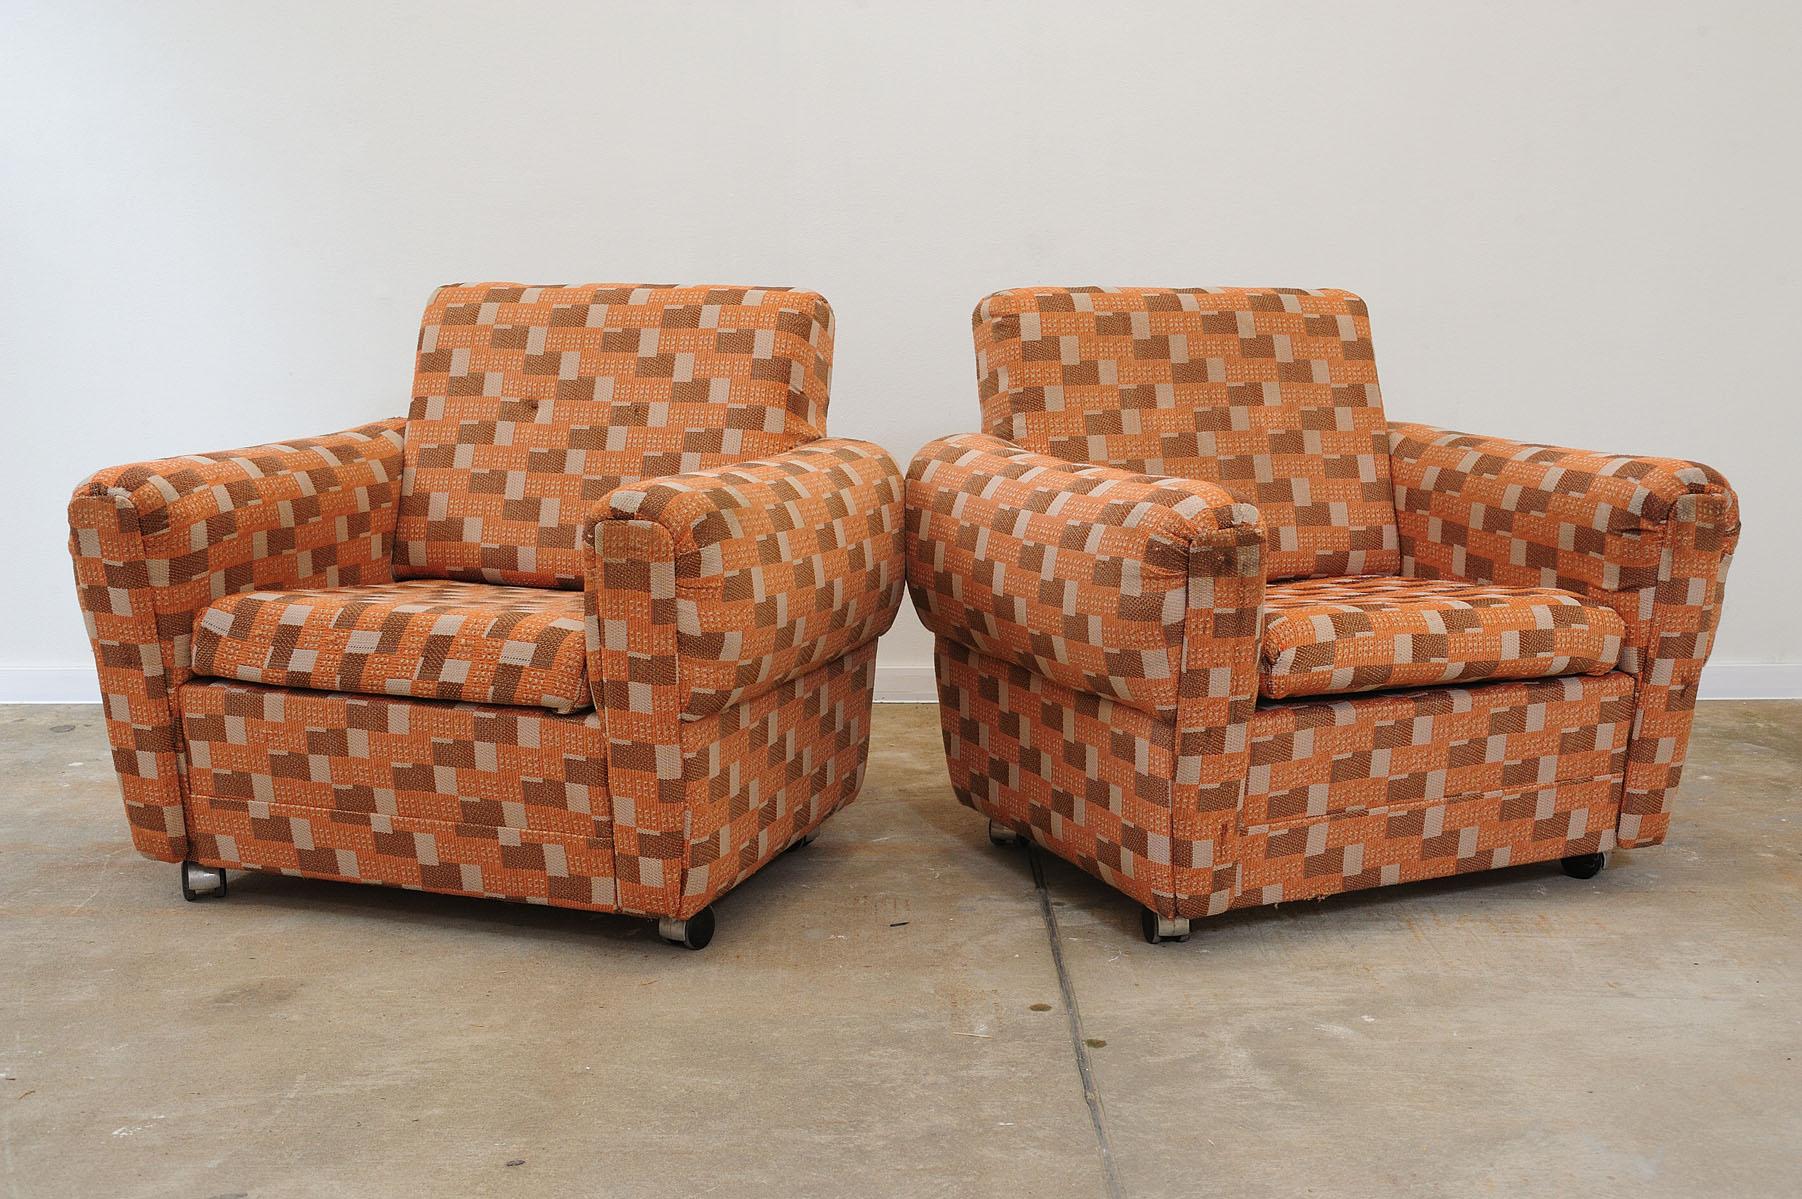 These armchairs on wheels were a part of a living room set made in the 1970´s.
They represent a typical example of furniture design of the 1970/1980s years of the 20th Century ´s in the former Czechoslovakia.
The furniture is very comfortable. It´s